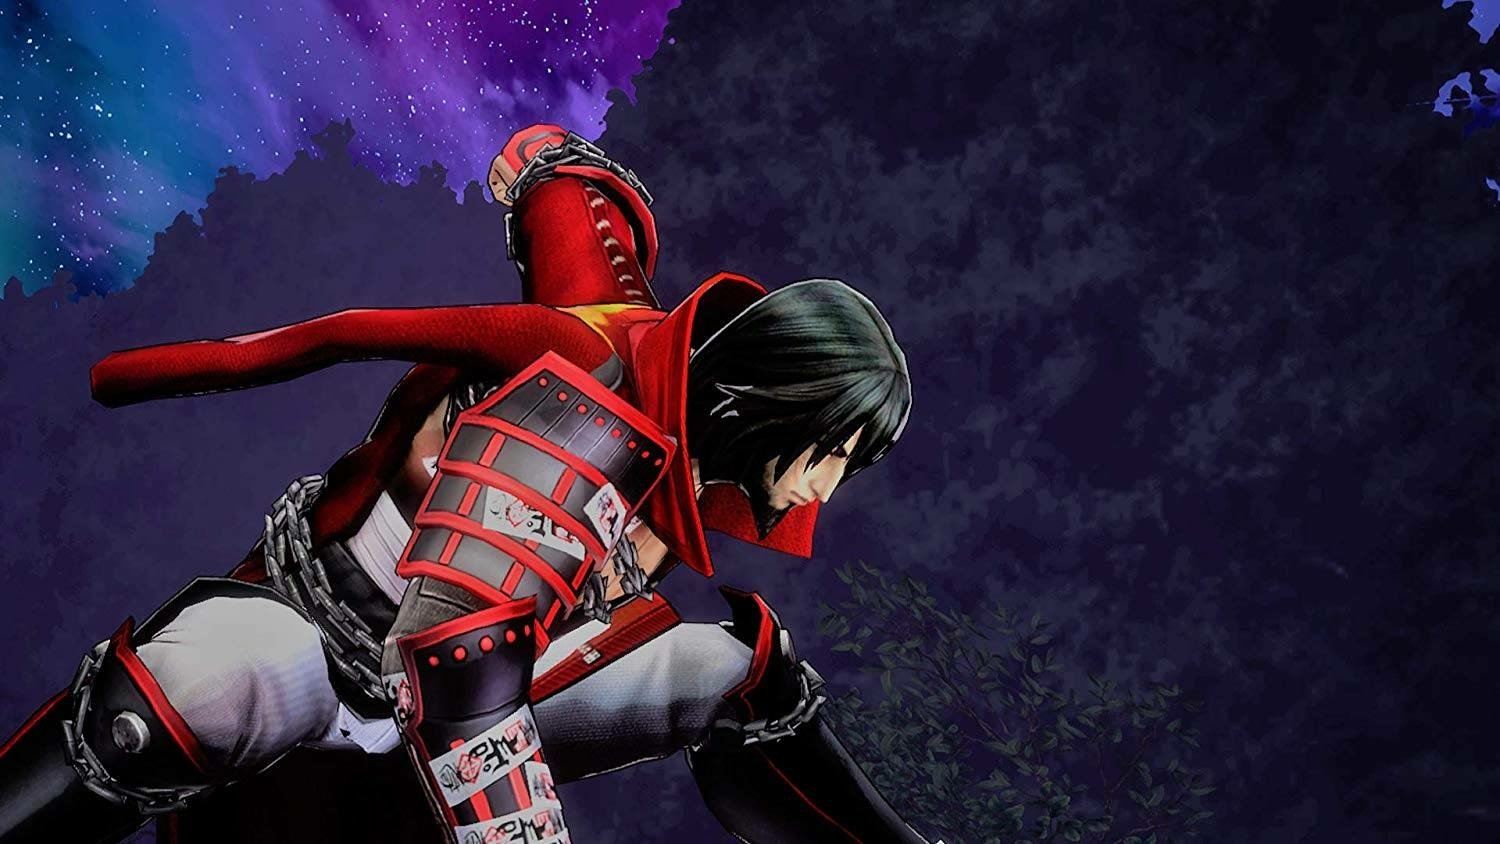 Character from Bloodstained: Ritual of the Night video game posing dramatically with cosmic background.